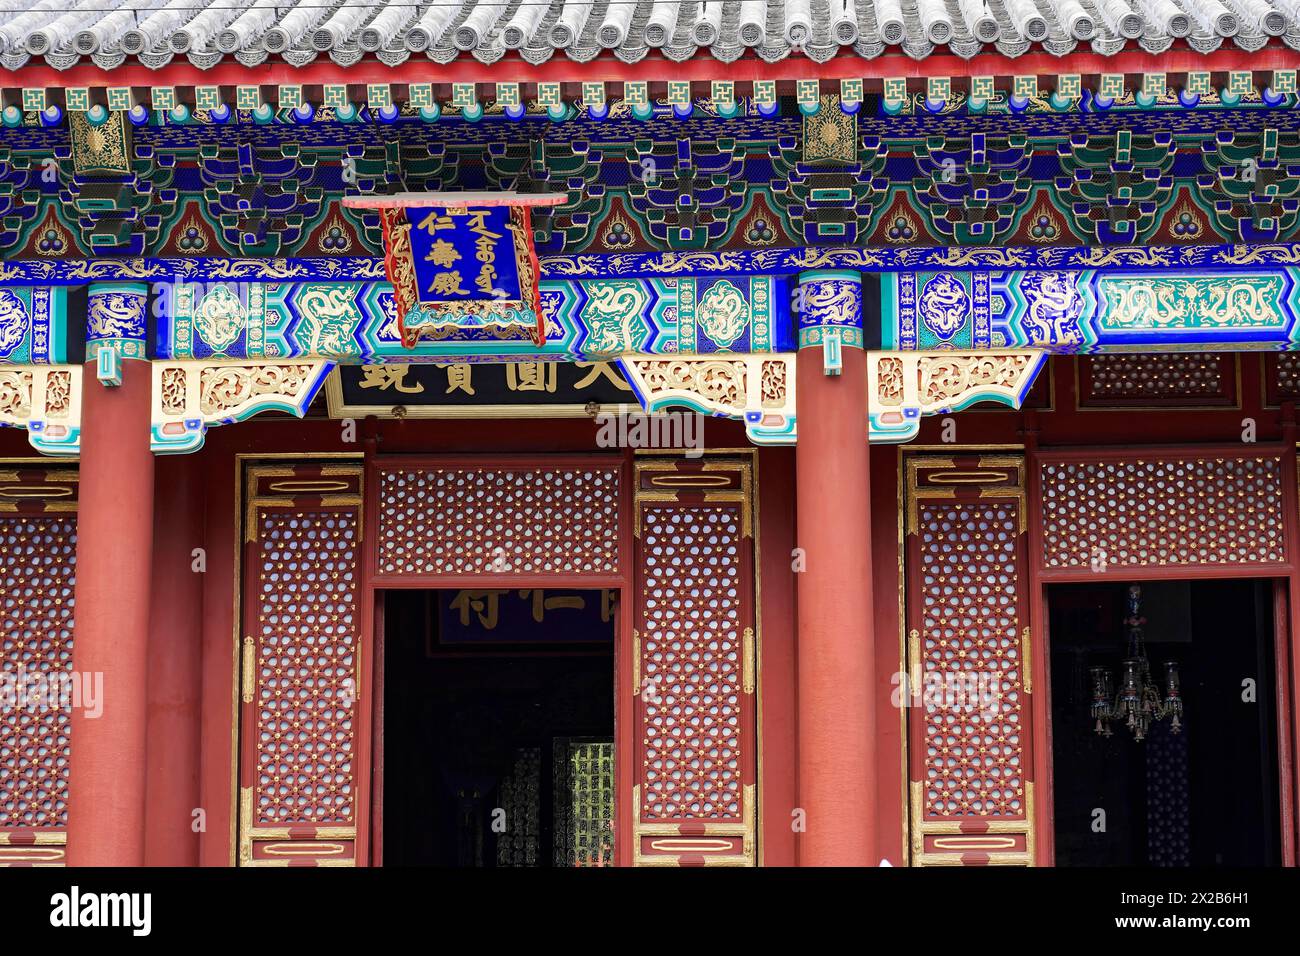 New Summer Palace, Beijing, China, Asia, Magnificent facade of a building with traditional Chinese architecture and decorations, Beijing Stock Photo